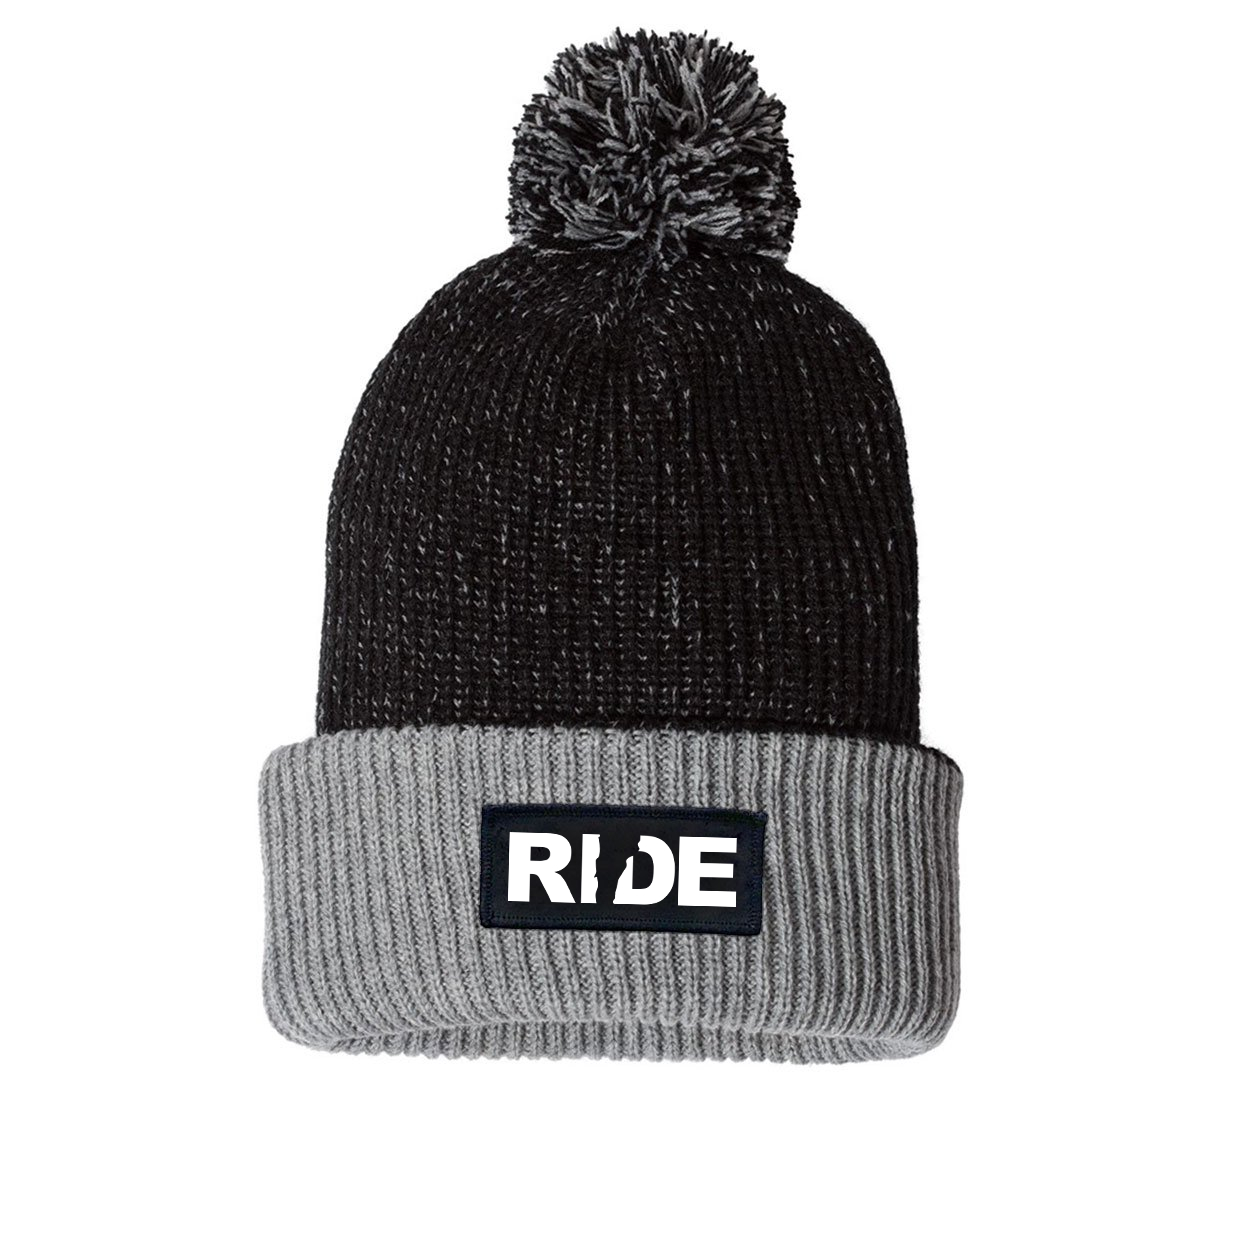 Ride Vermont Night Out Woven Patch Roll Up Pom Knit Beanie Black/Gray (White Logo)